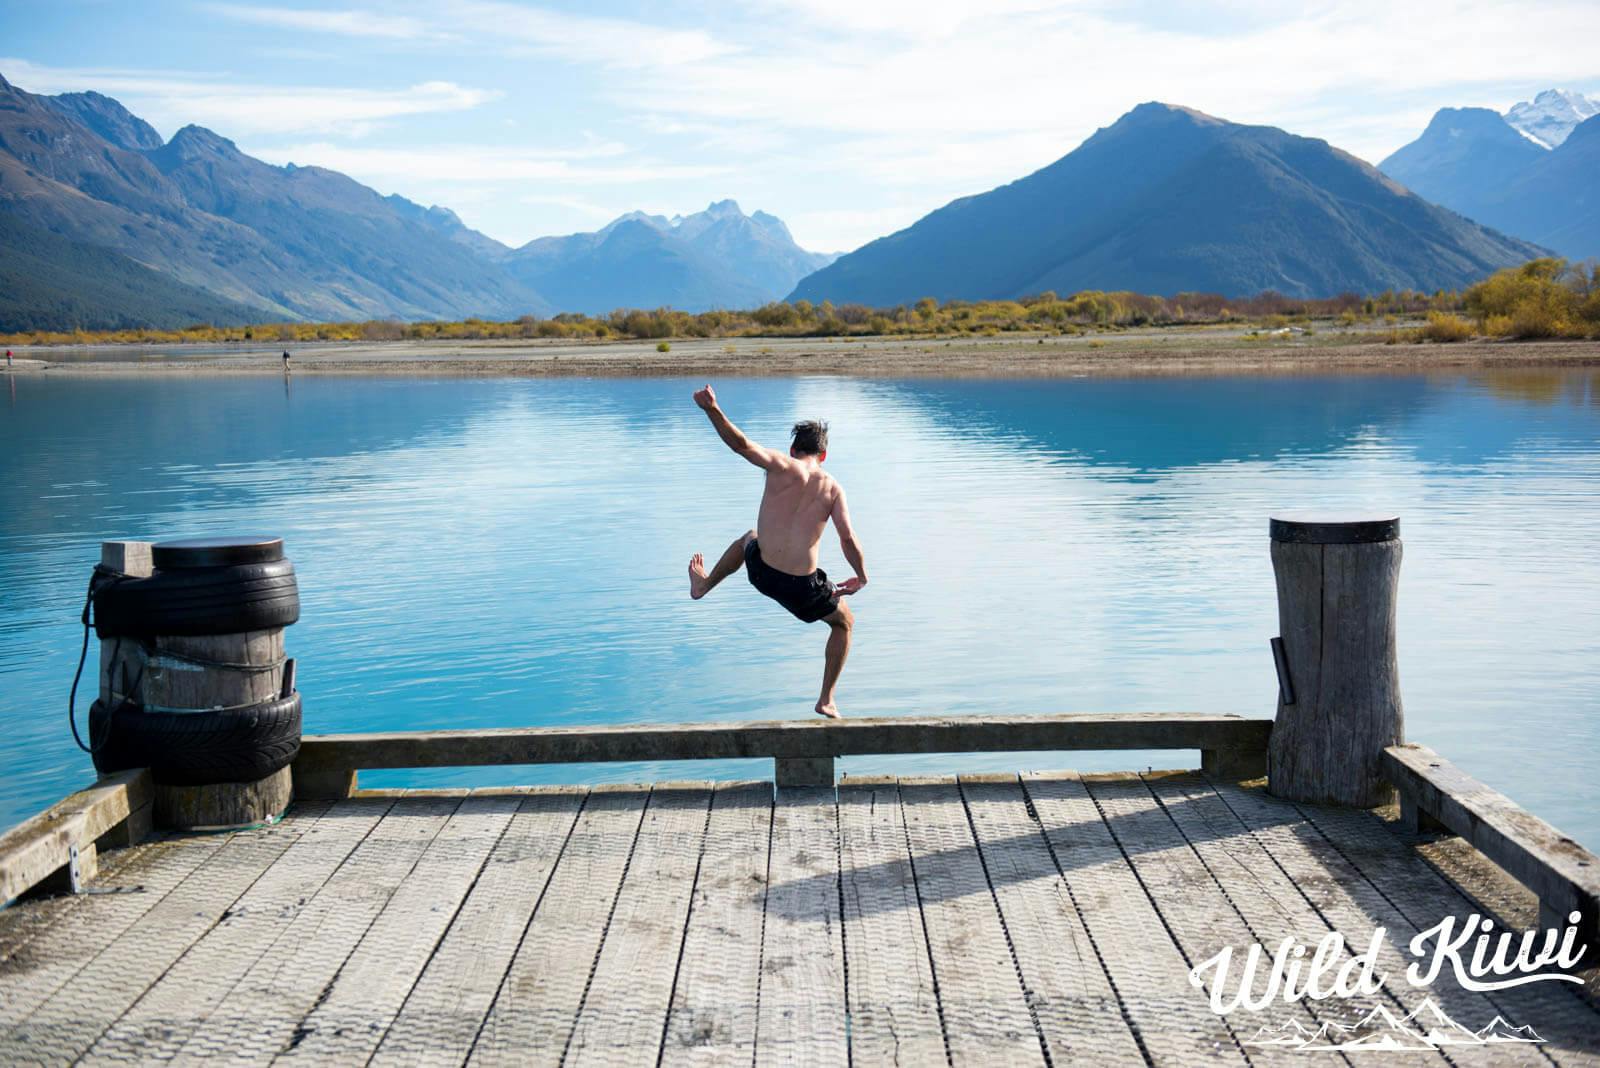 Road tripping in New Zealand - See and do the things you want to do